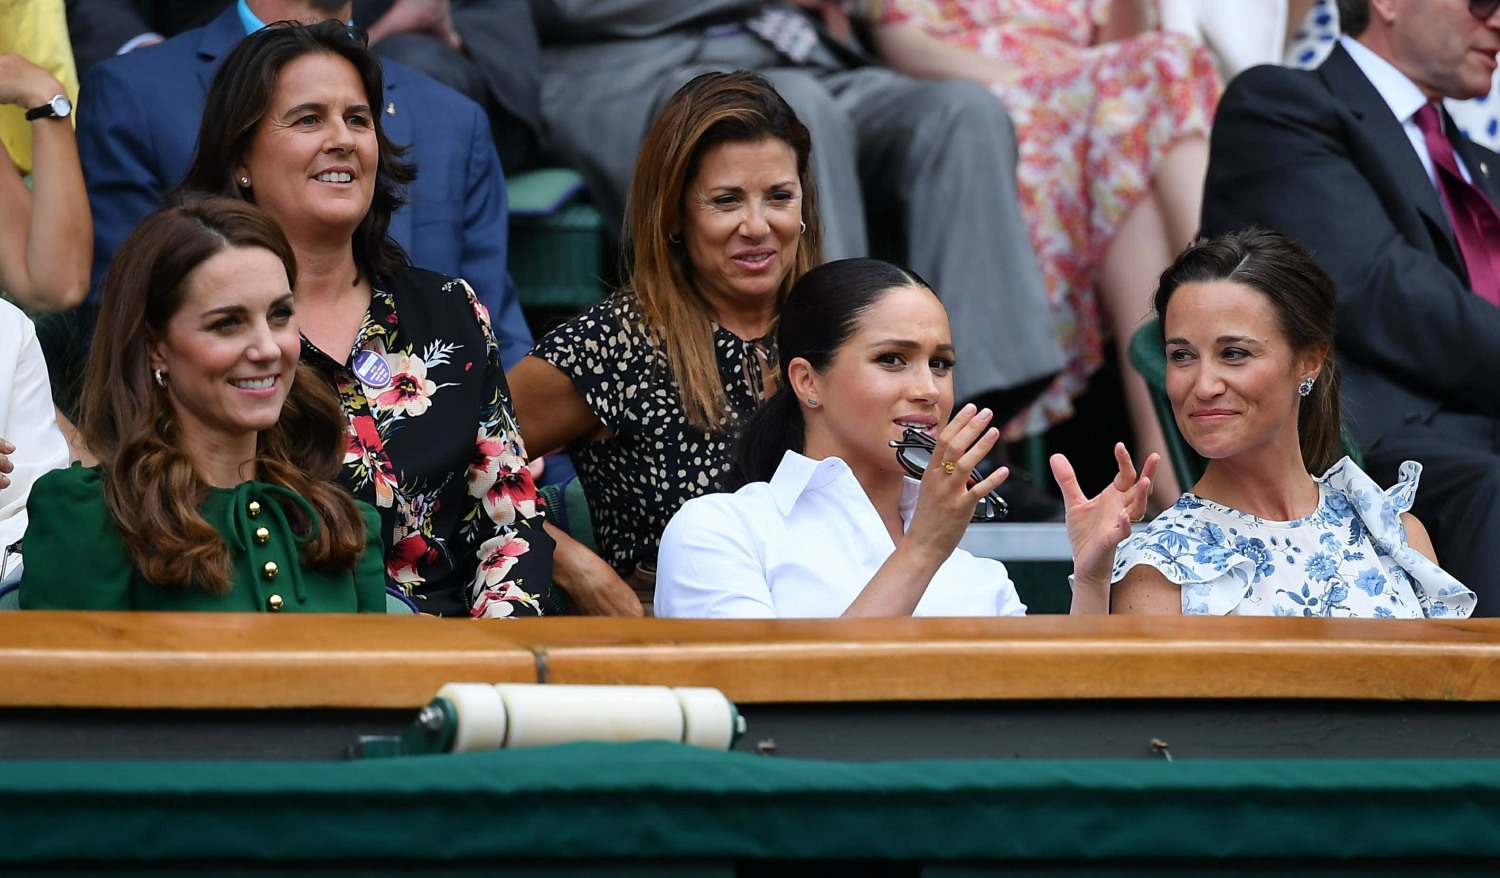 Kate Middleton, Meghan Markle and Pippa Middleton in the stands at the Wimbledon Women's Final to support Serena Williams!